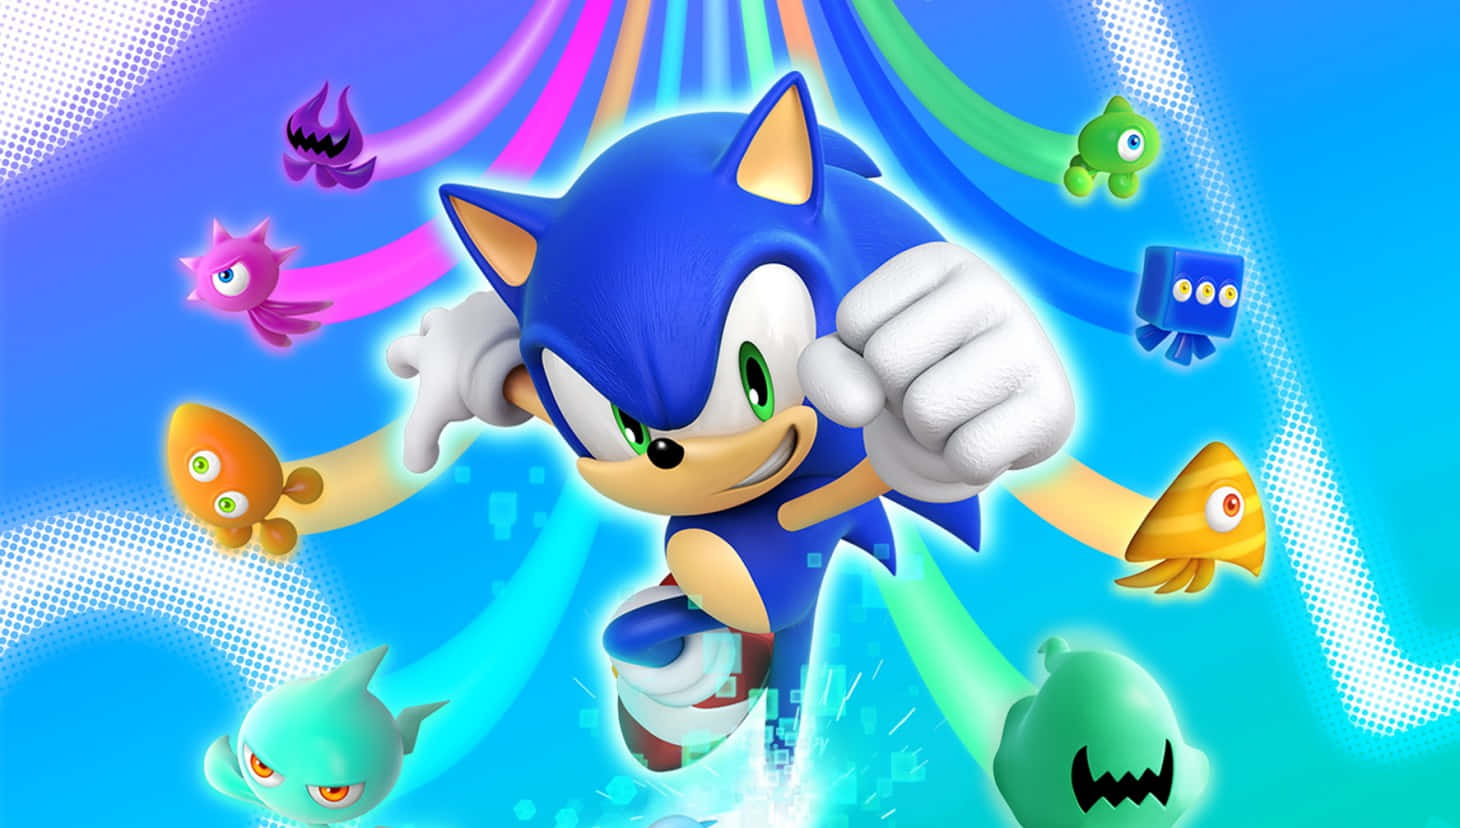 Join Sonic on his Colorful Adventure! Wallpaper